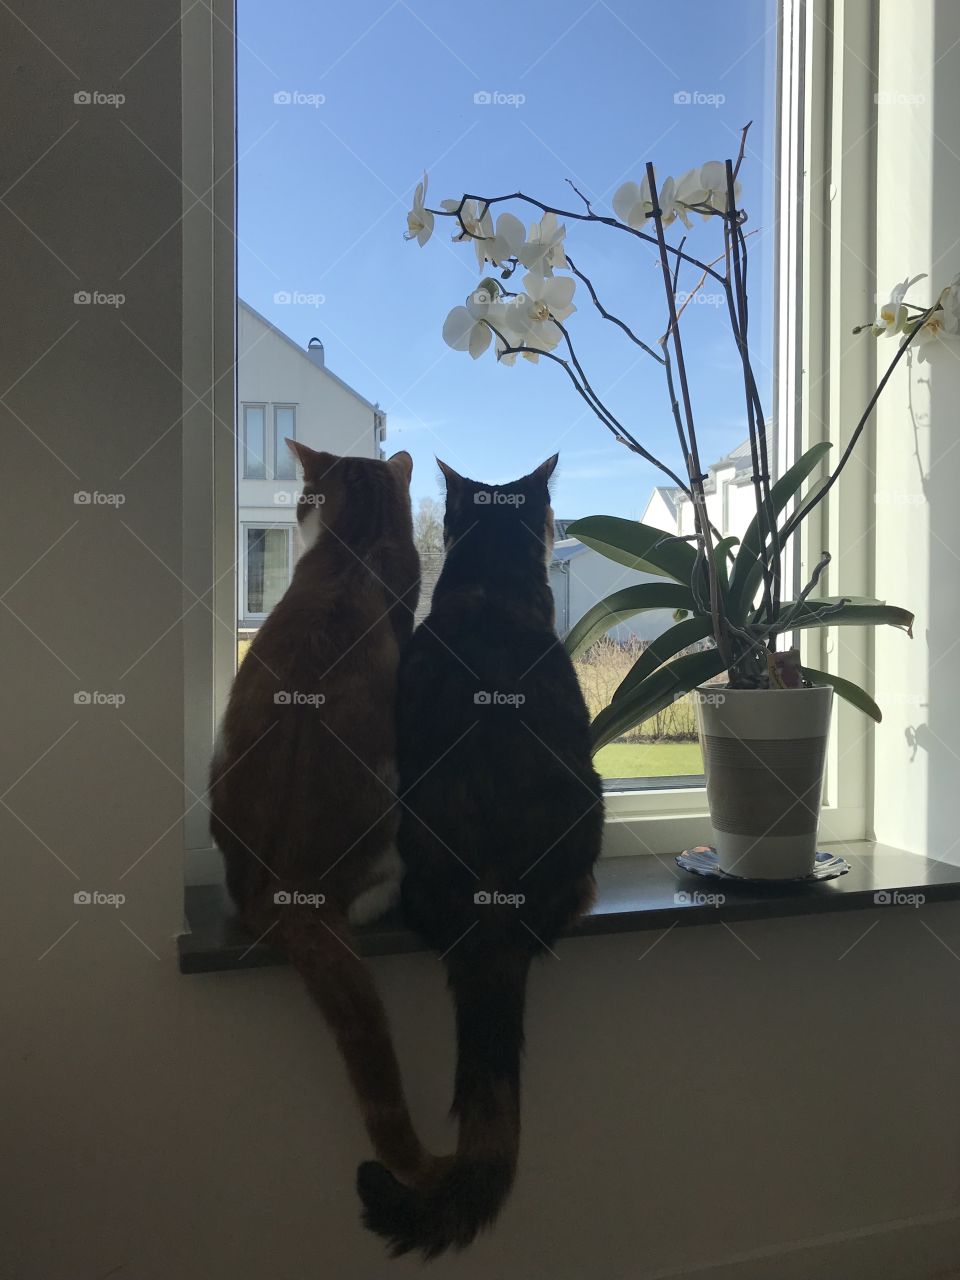 Couple of cats